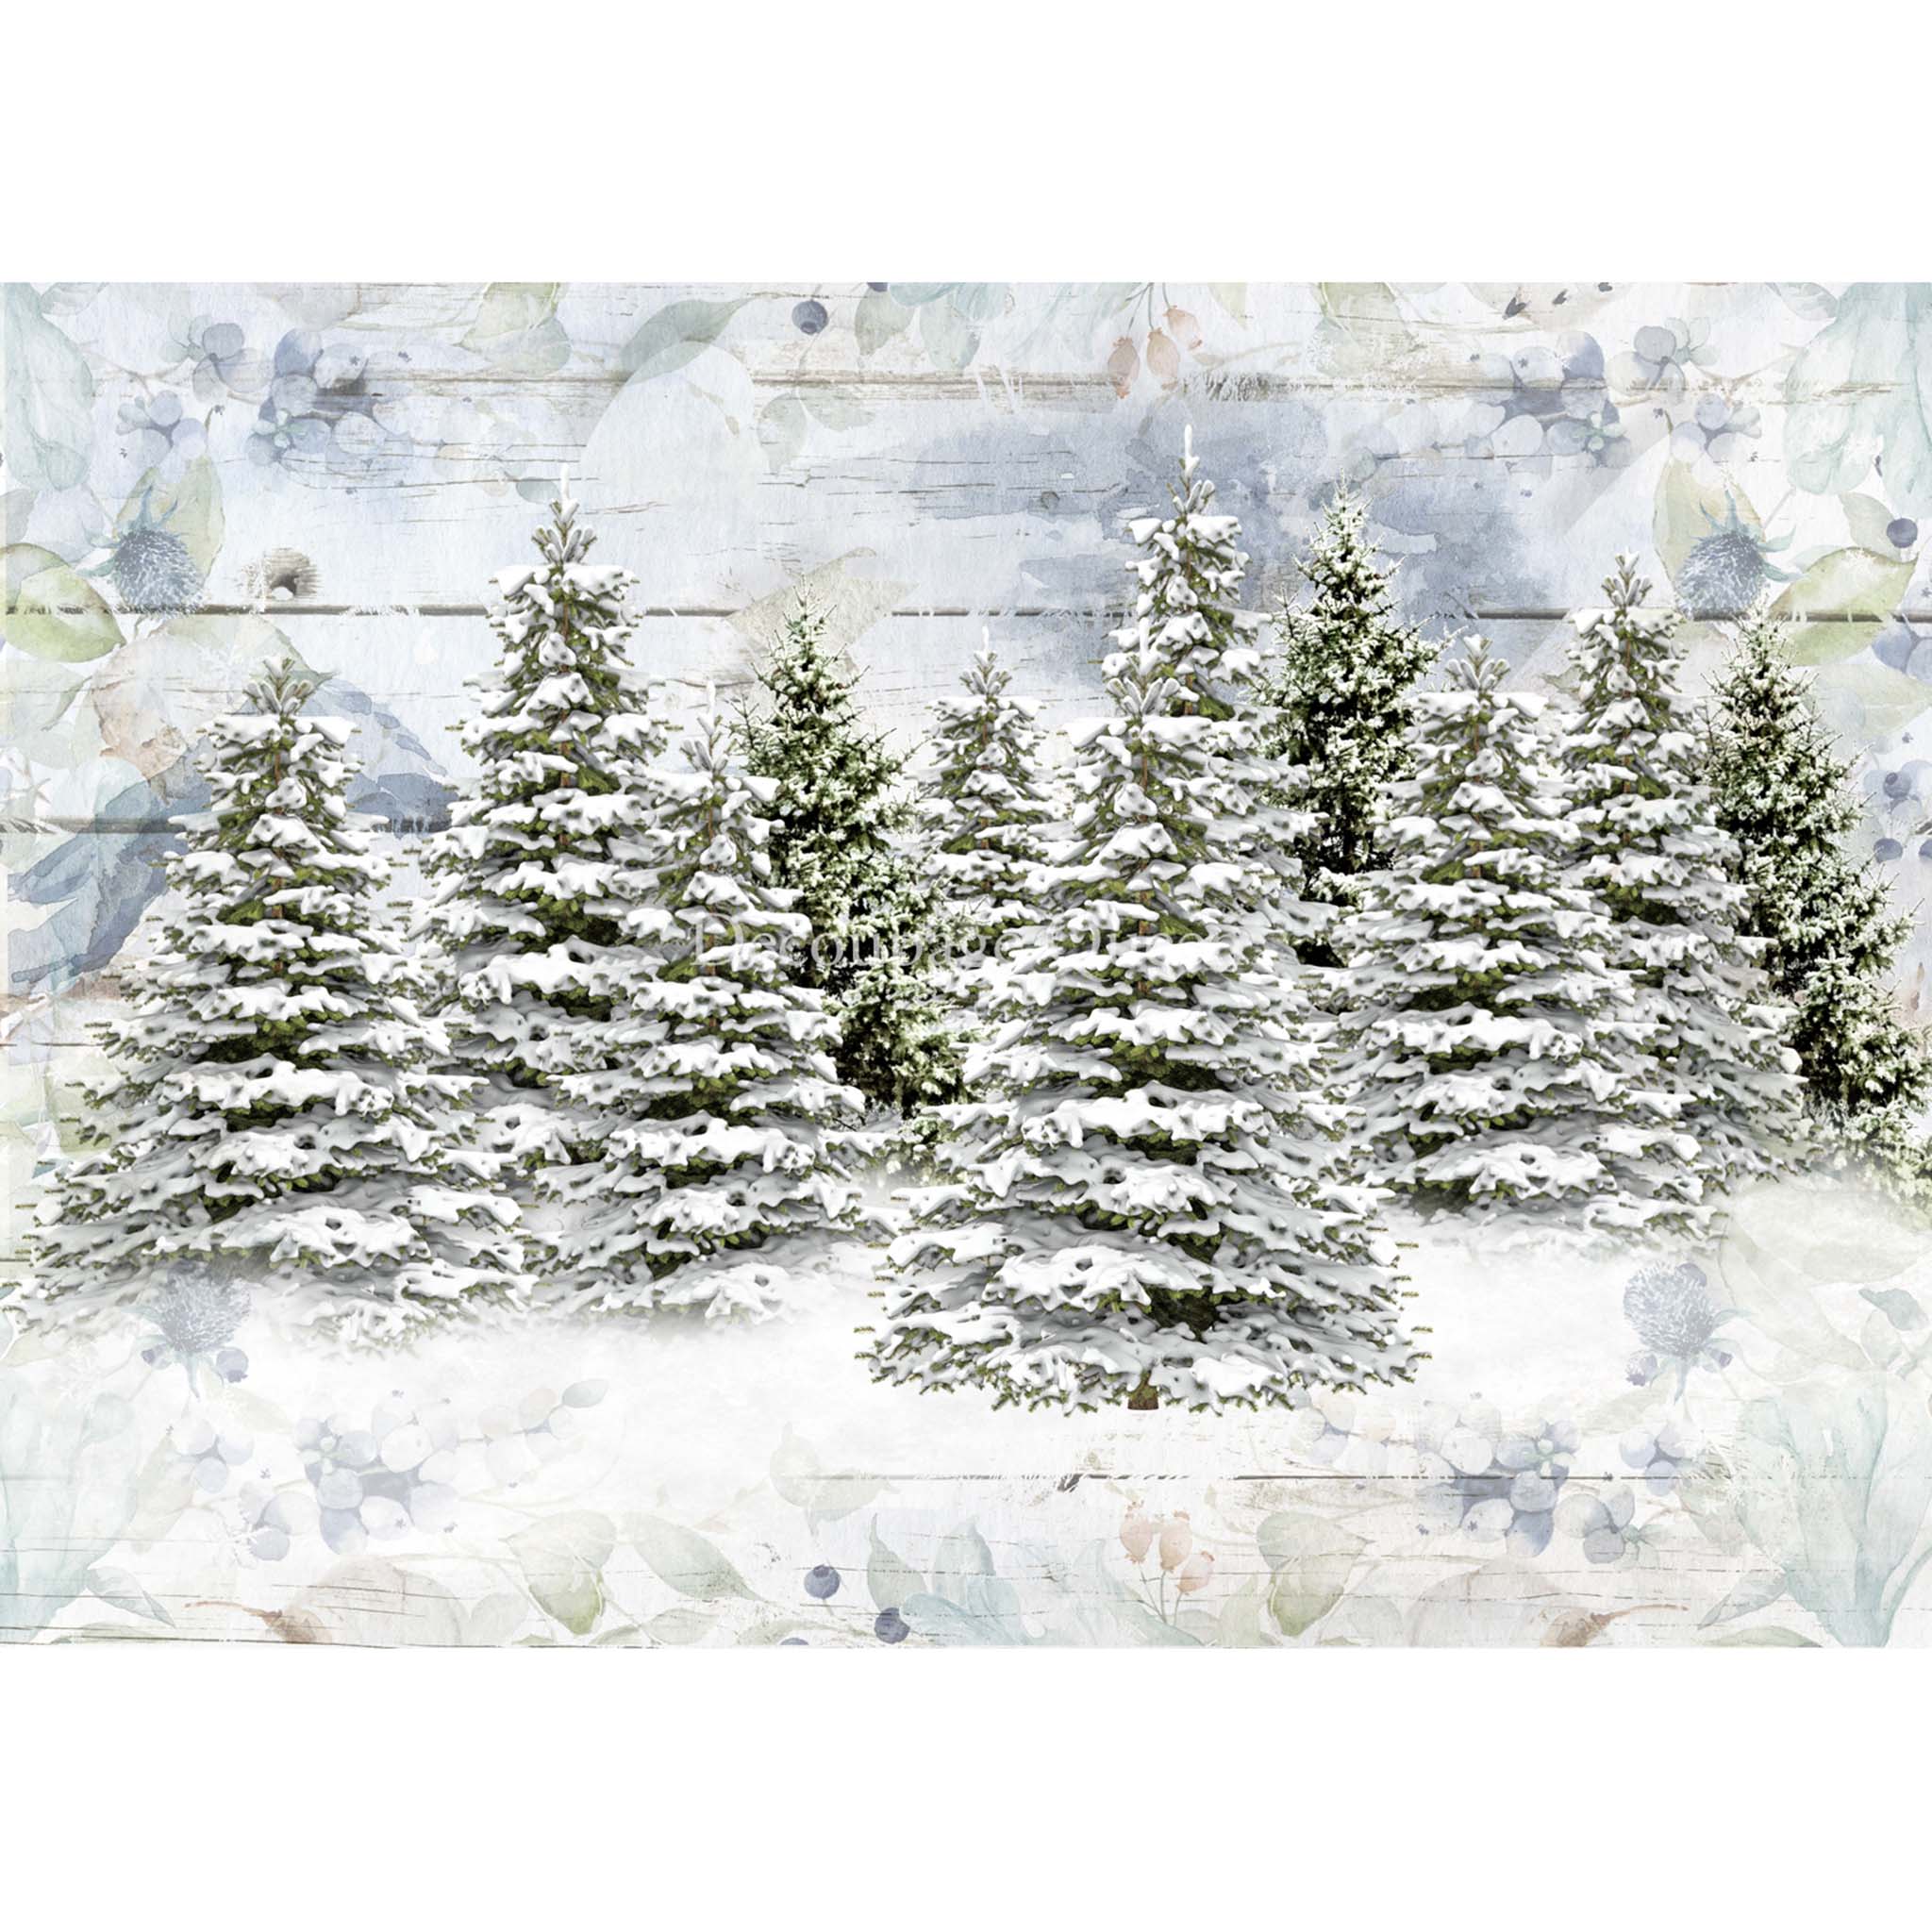 A4 rice paper design featuring a snowy scene full of pine trees. White borders are on the top and bottom.